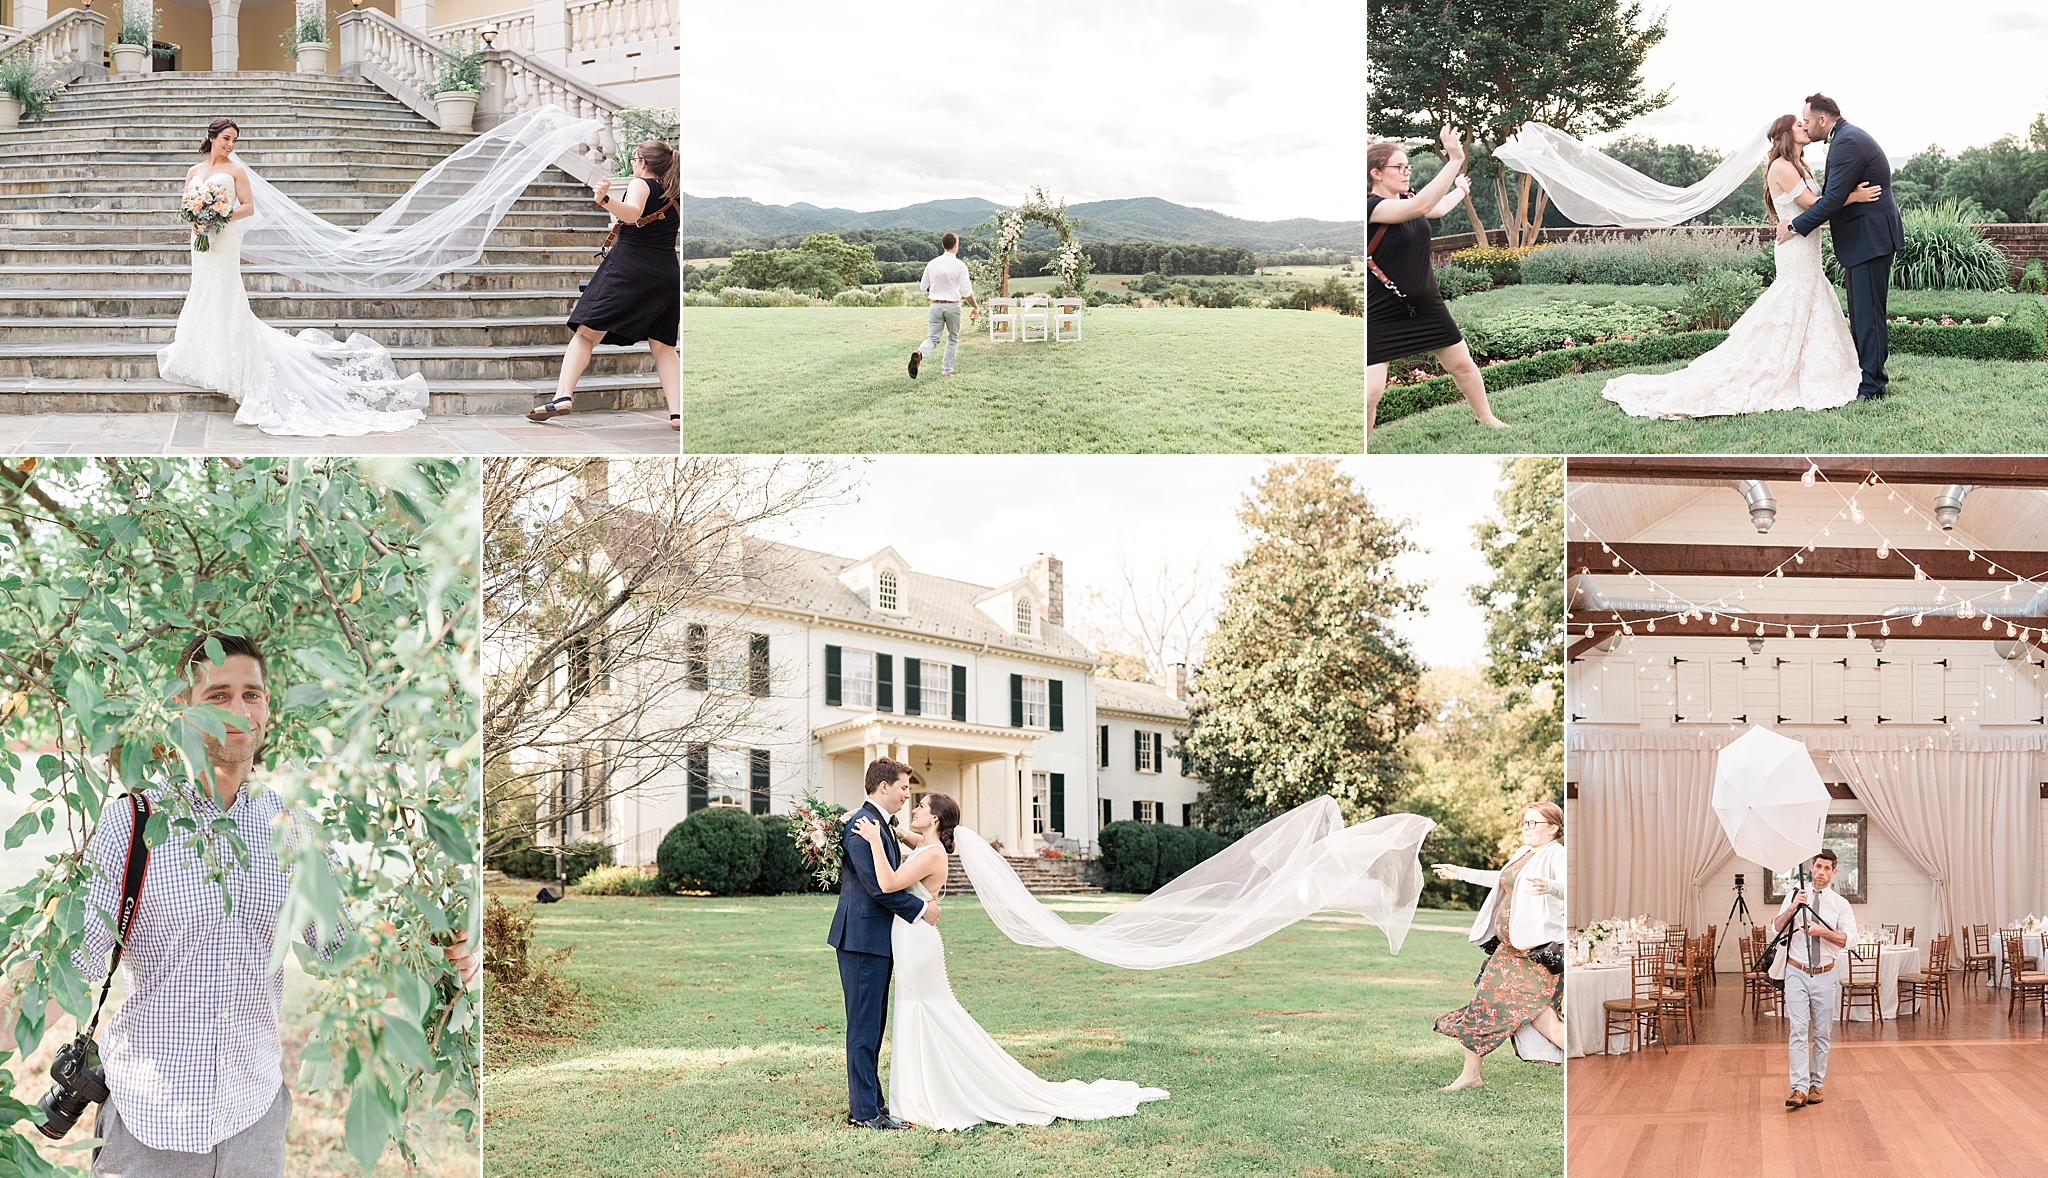 Go behind the scenes during the epic 2018 season with this Washington, DC wedding photographer to see all the fun that takes place on a client's big day!